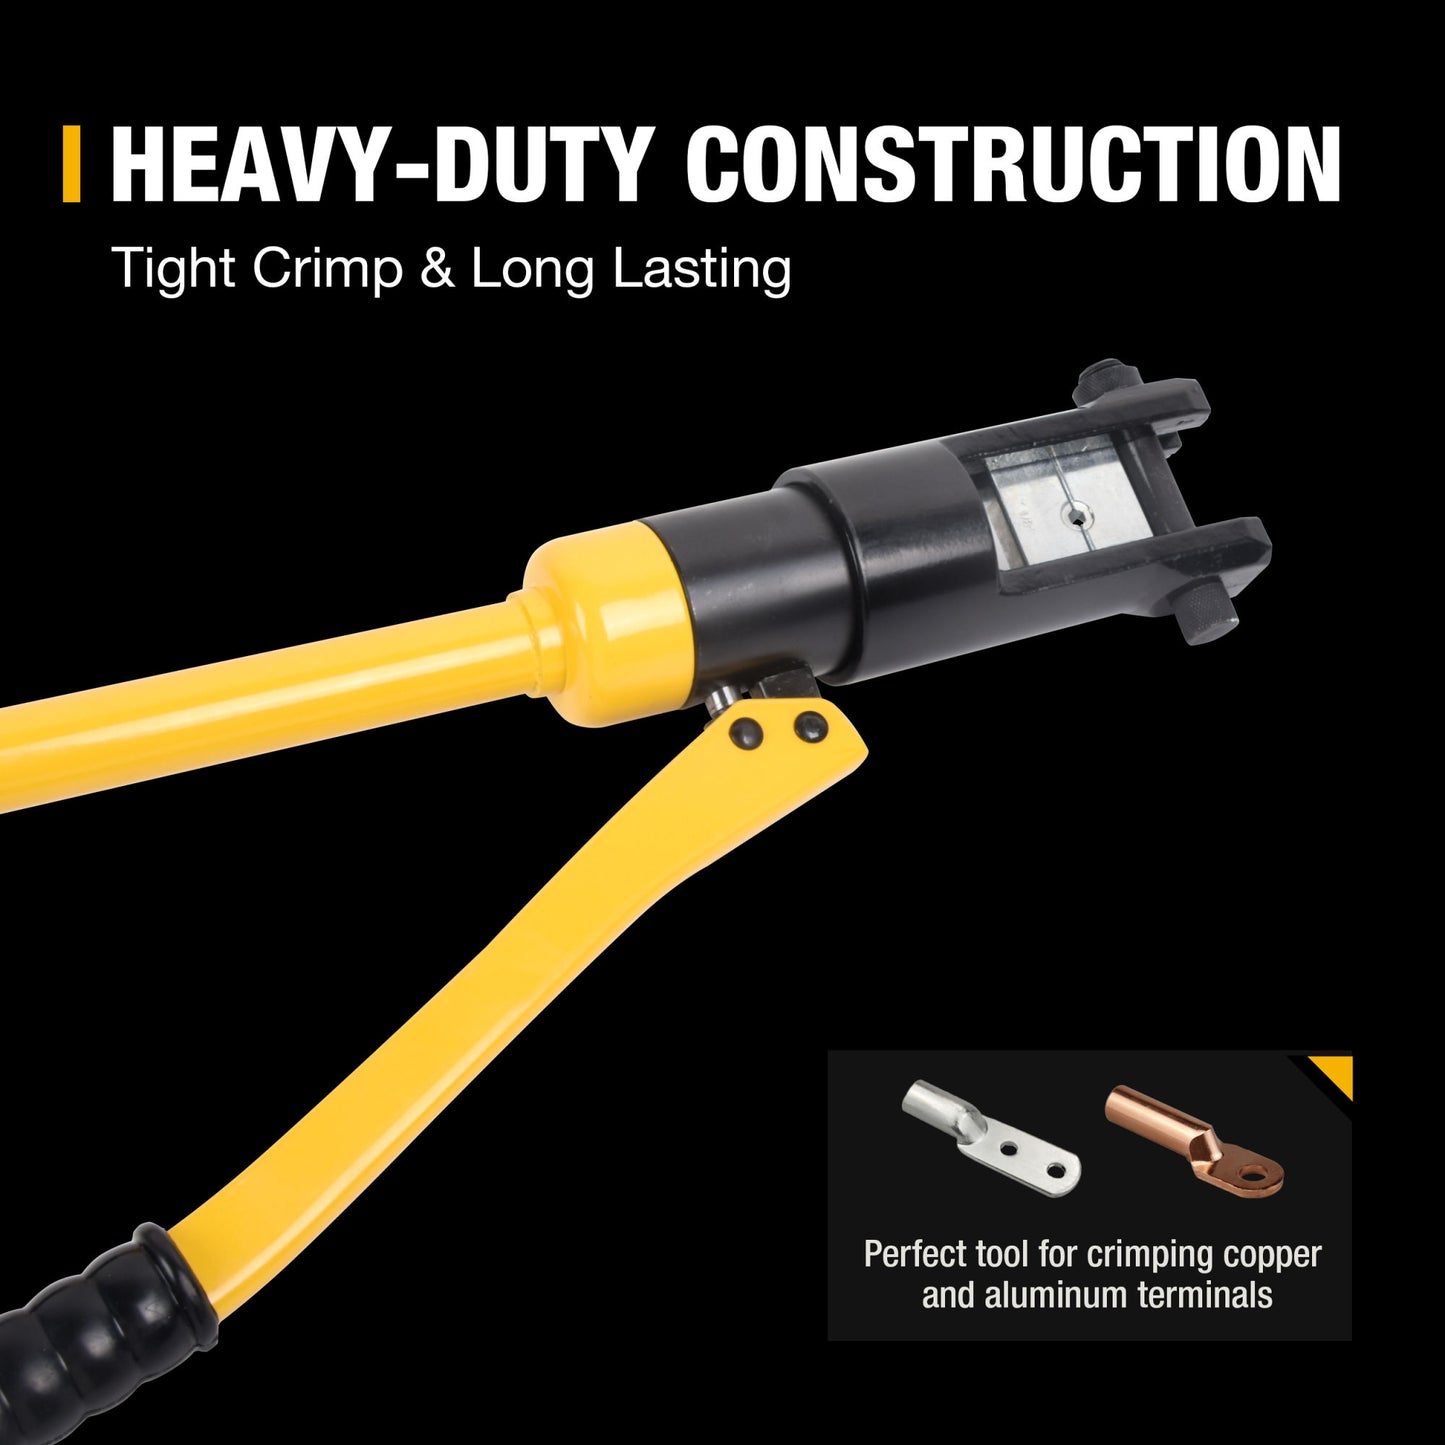 16T Hydraulic Crimping Tool 9 AWG to 600 MCM Battery Cable Crimping Tool 0.87 inch Stroke Hydraulic Lug Crimper Electrical Terminal Crimper with 13 Pairs of Dies